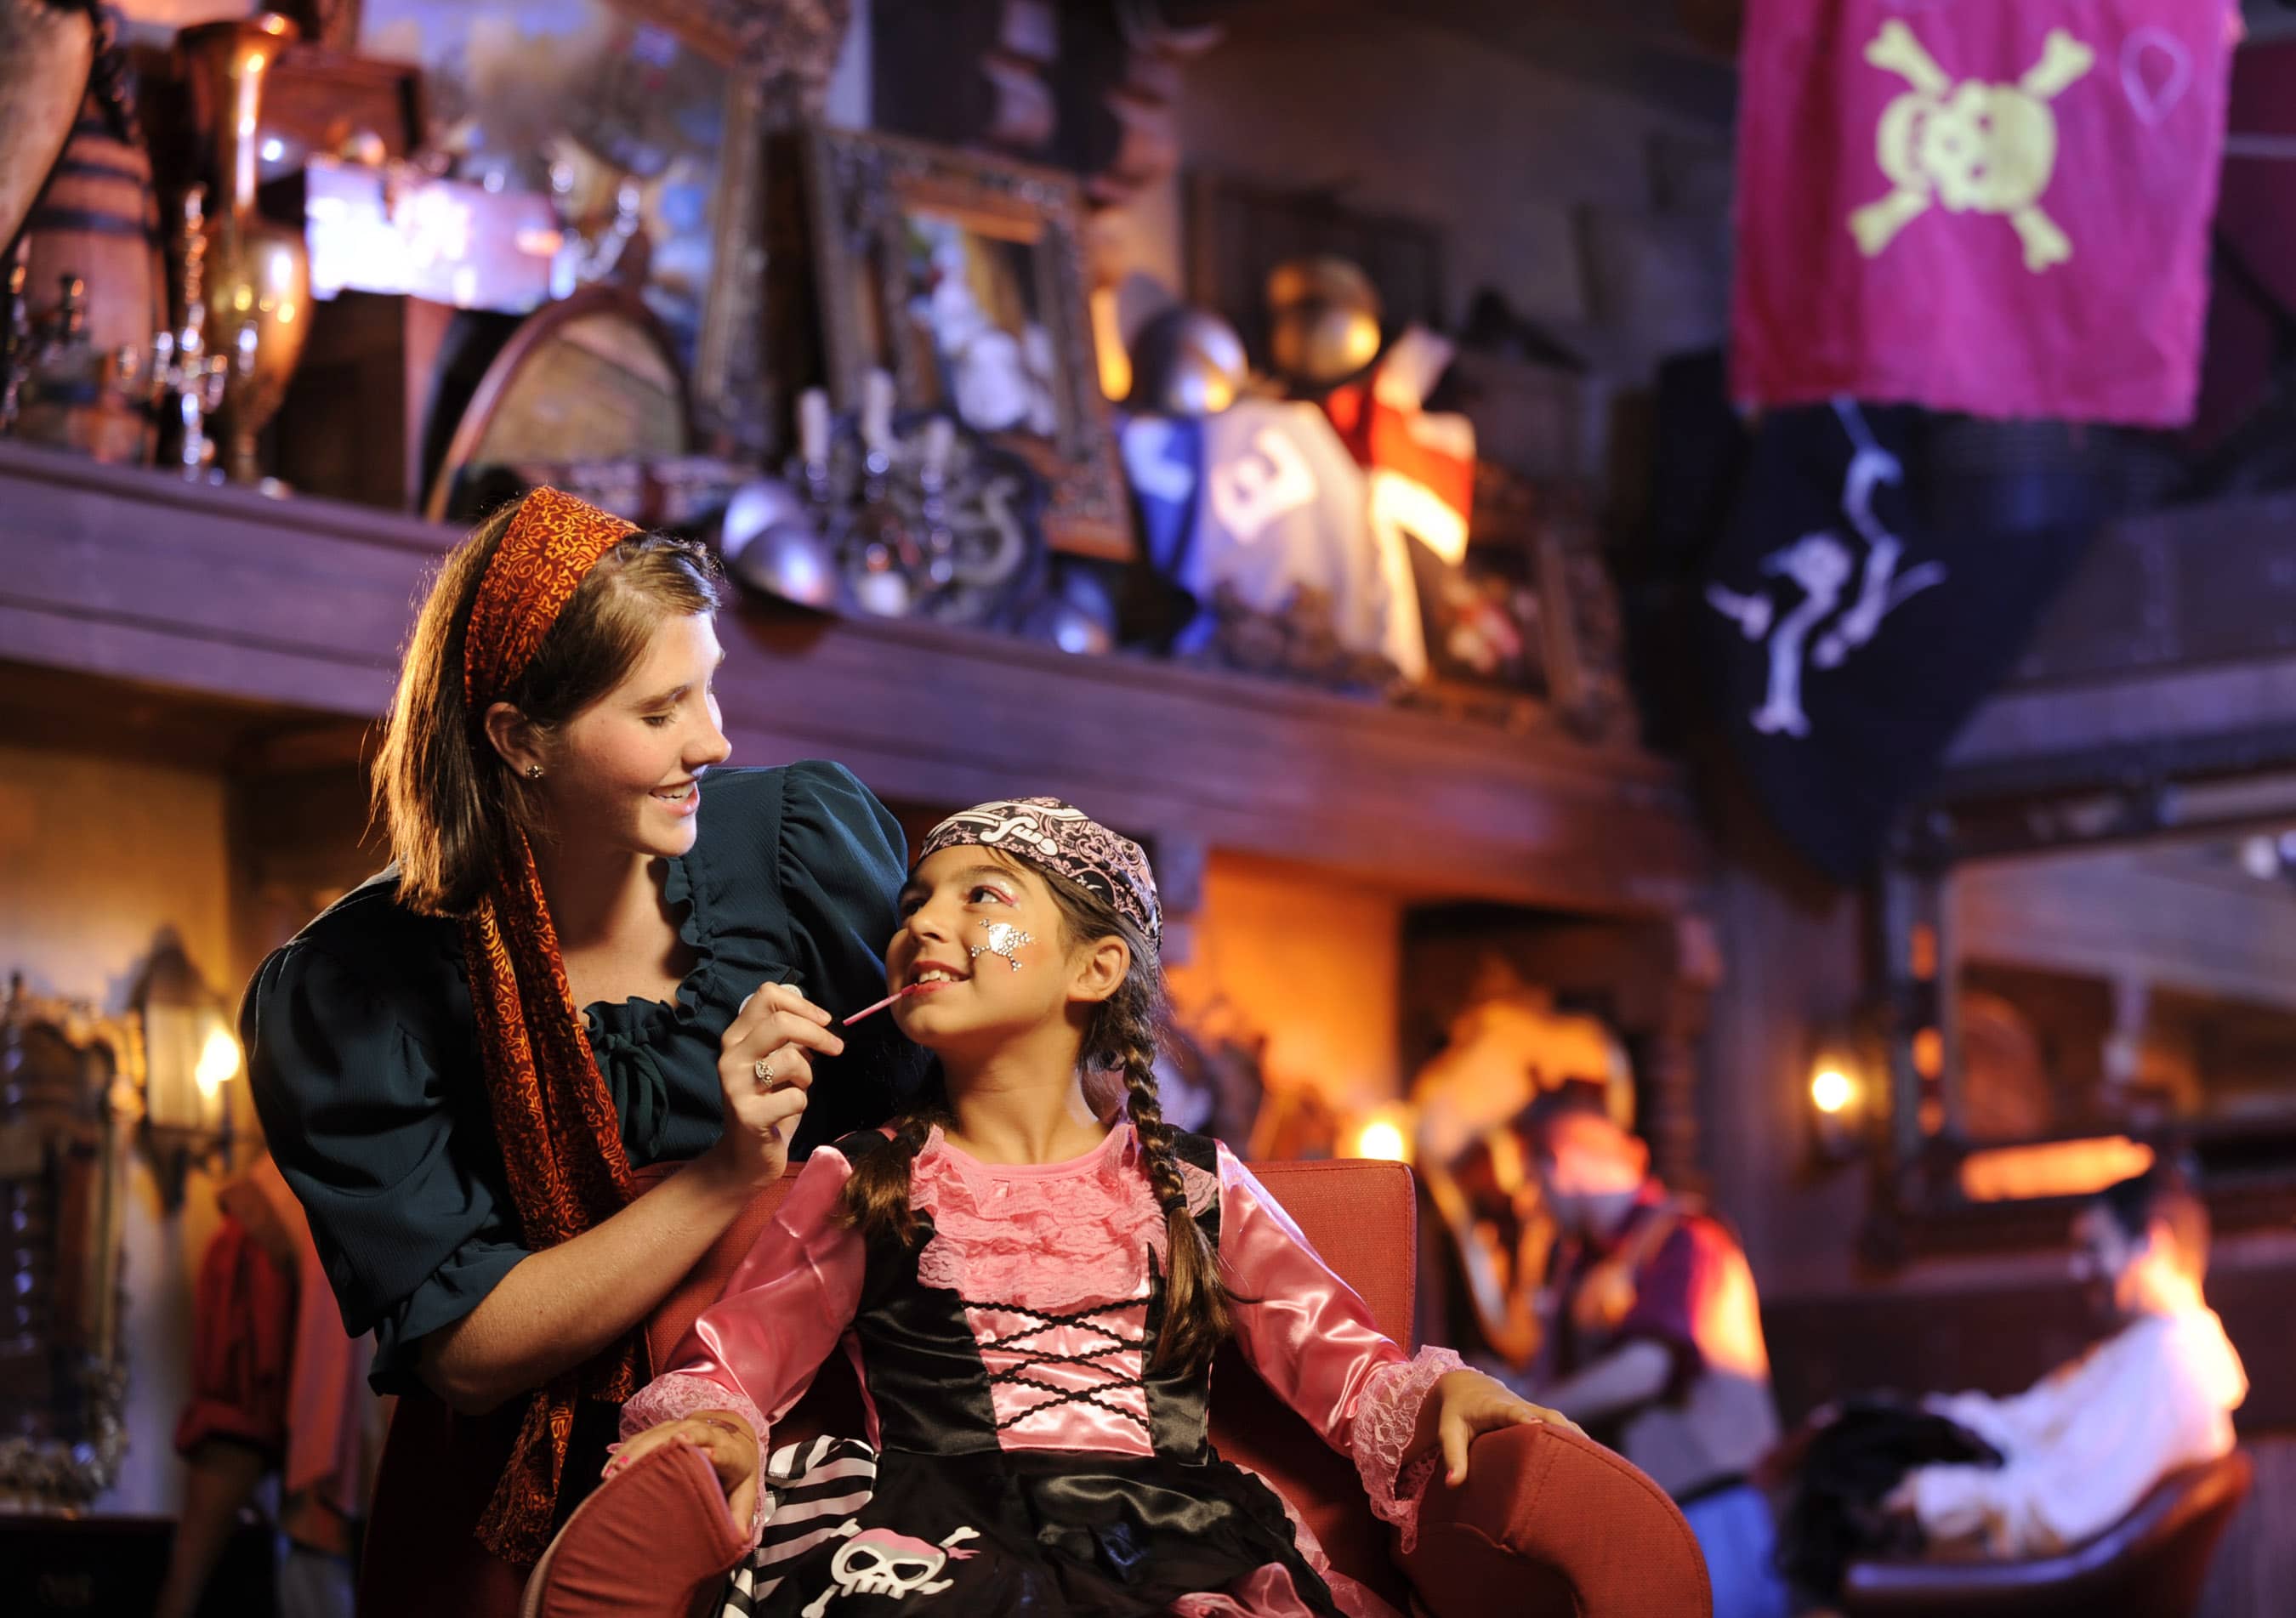 Get a pirate makeover at Magic Kingdom to celebrate a birthday at Disney World